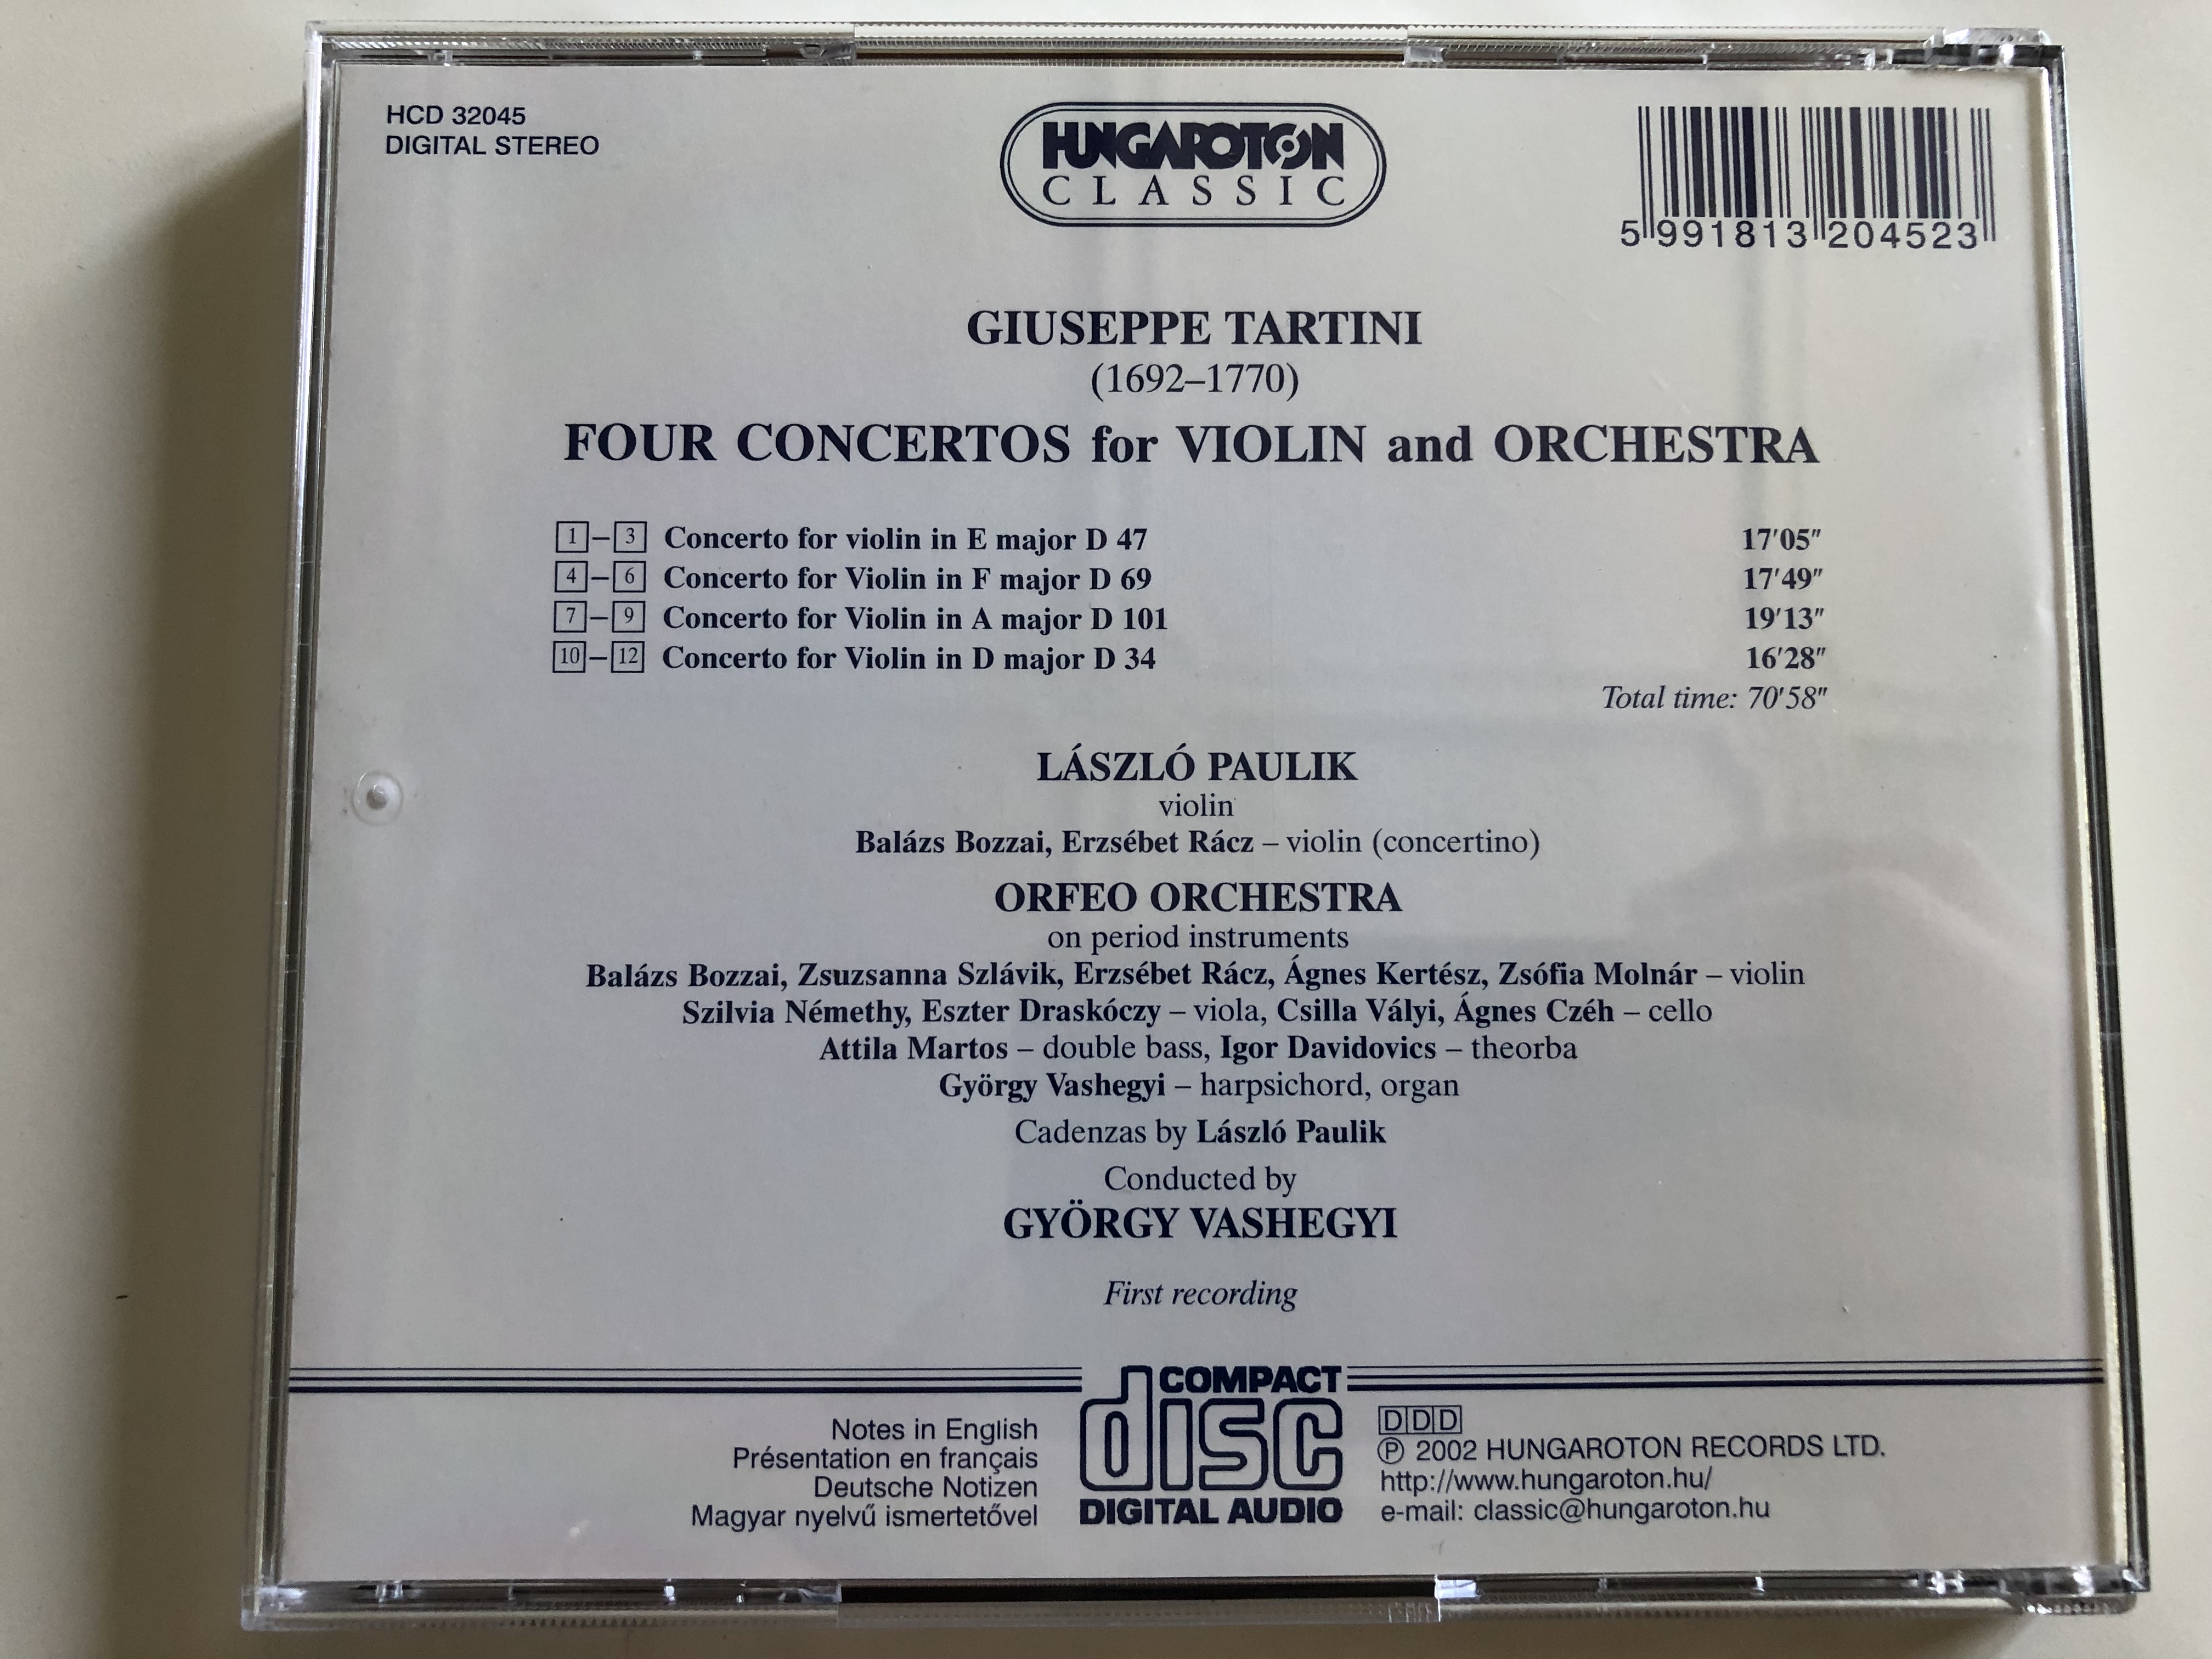 tartini-four-concertos-for-violin-and-orchestra-l-szl-paulik-violin-orfeo-orchestra-on-period-instruments-conducted-by-gy-rgy-vashegyi-hungaroton-classic-audio-cd-2002-hdc-32045-9-.jpg